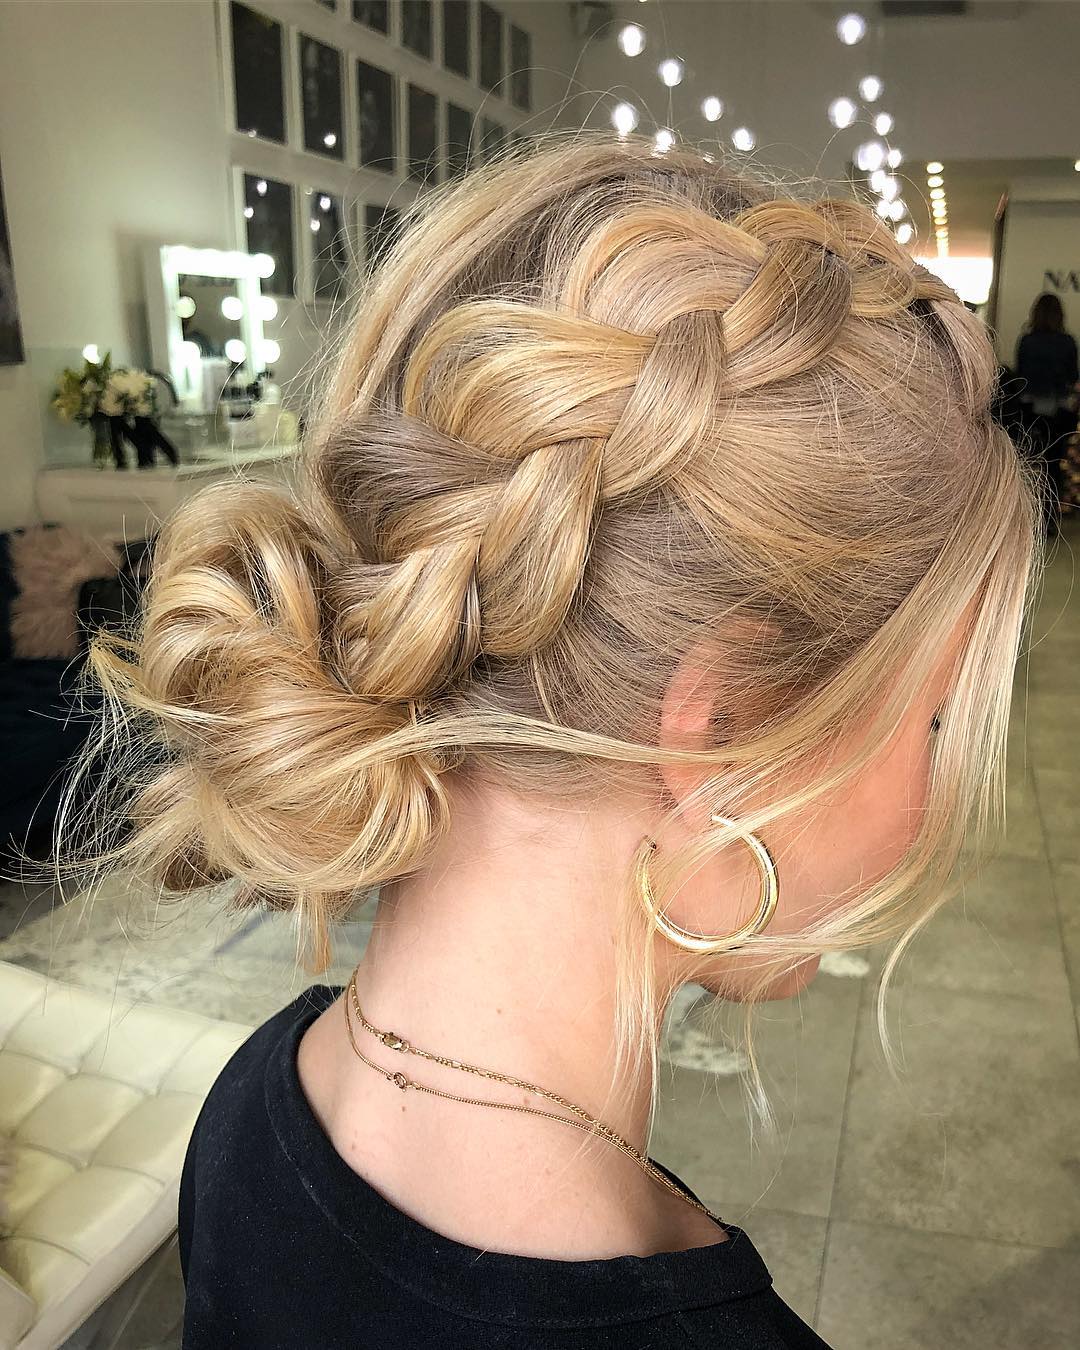 Chic Messy Bun Ideas To Inspire Your Next Updo Beautiful Trends Today 